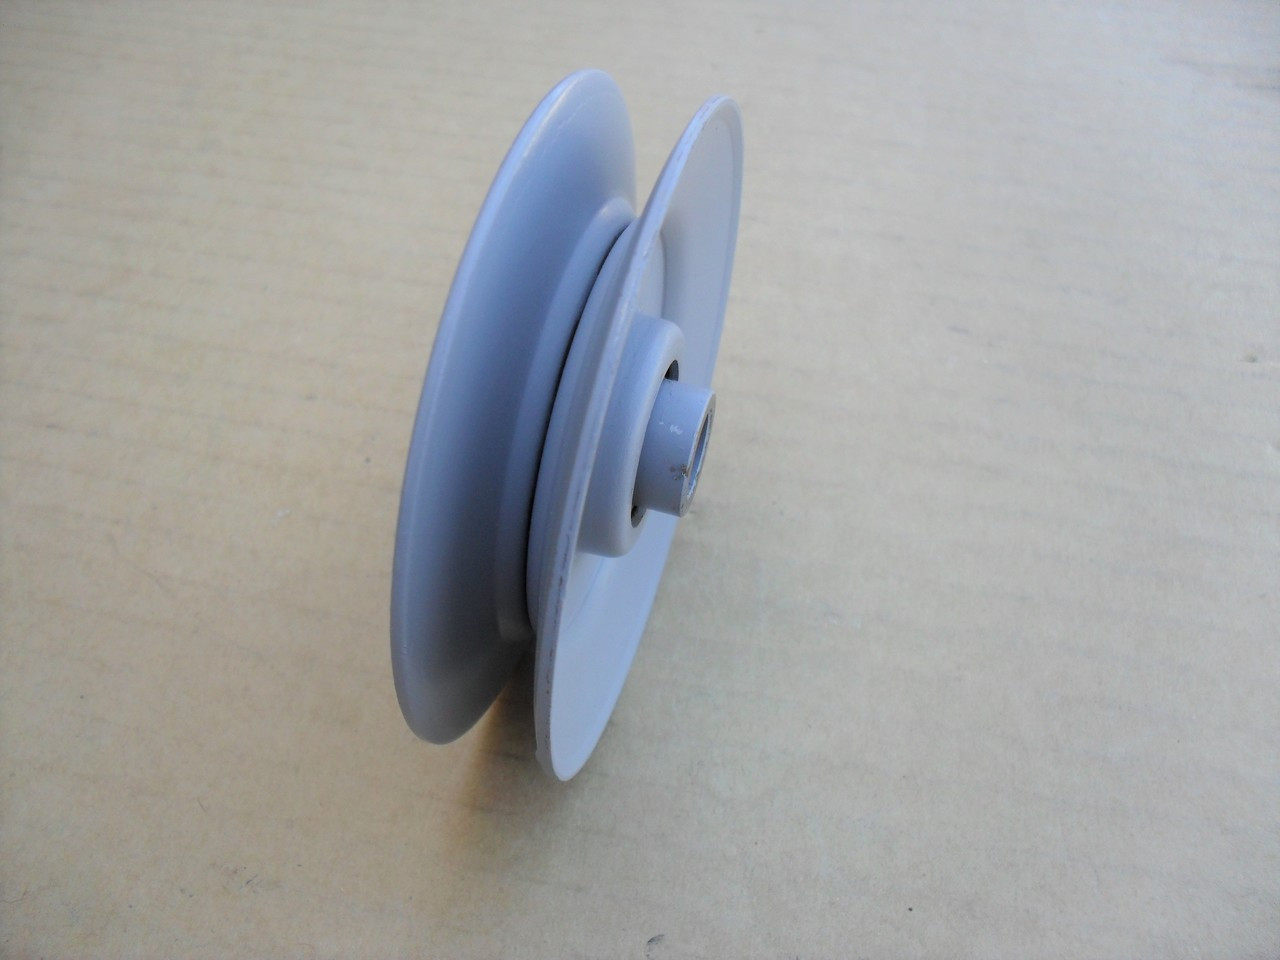 Idler Pulley for Snapper 18288, 7018288, 7018288YP, 1-8288, Made In USA, Height: 5/8" ID: 3/8" OD: 3-1/16"